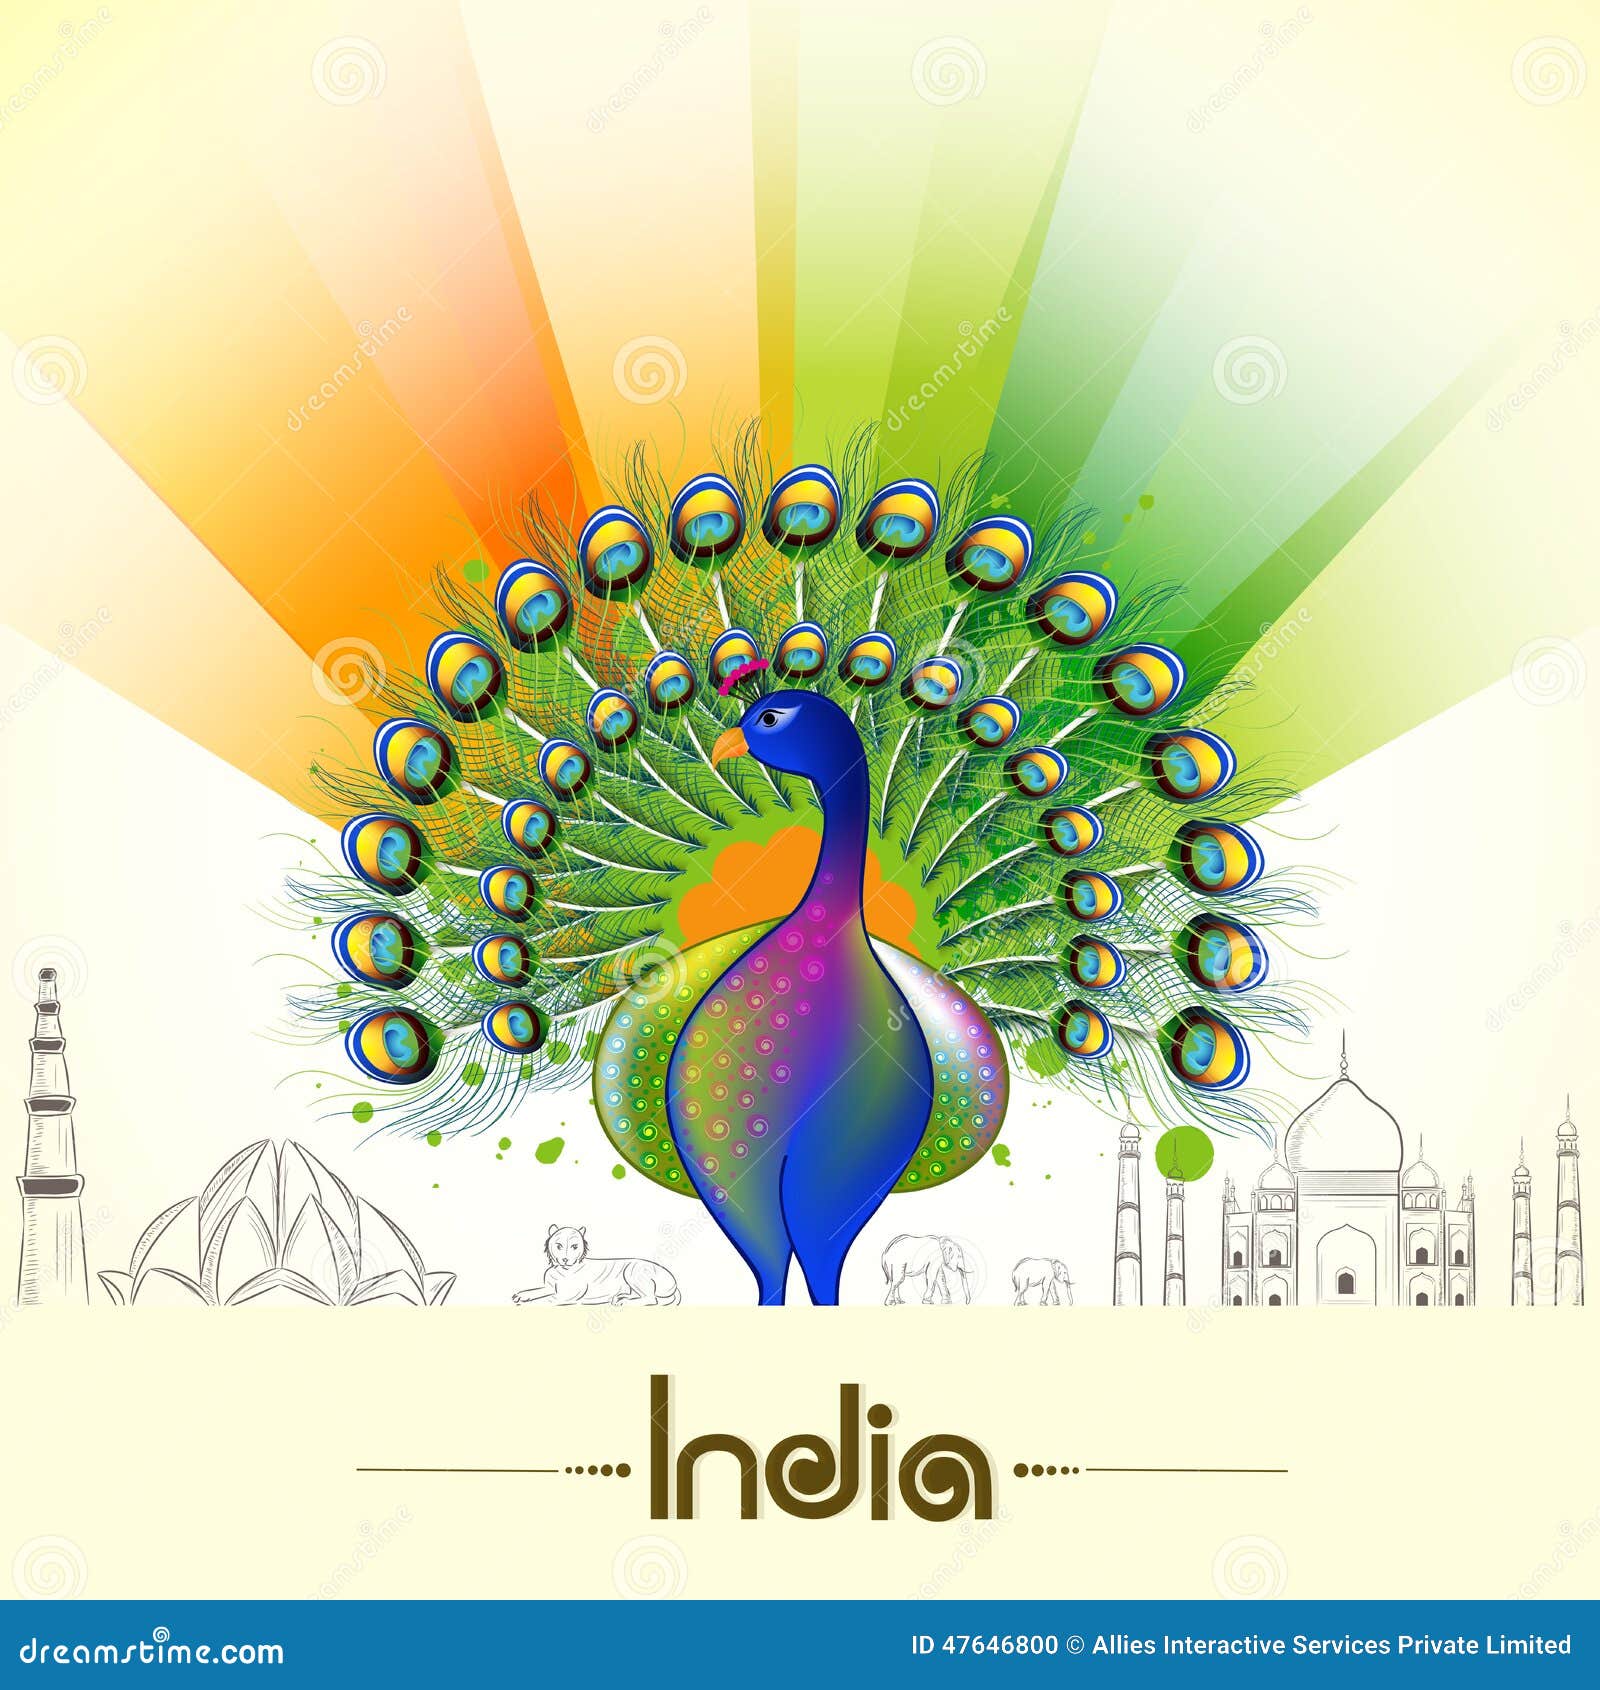 republic day drawing peacock